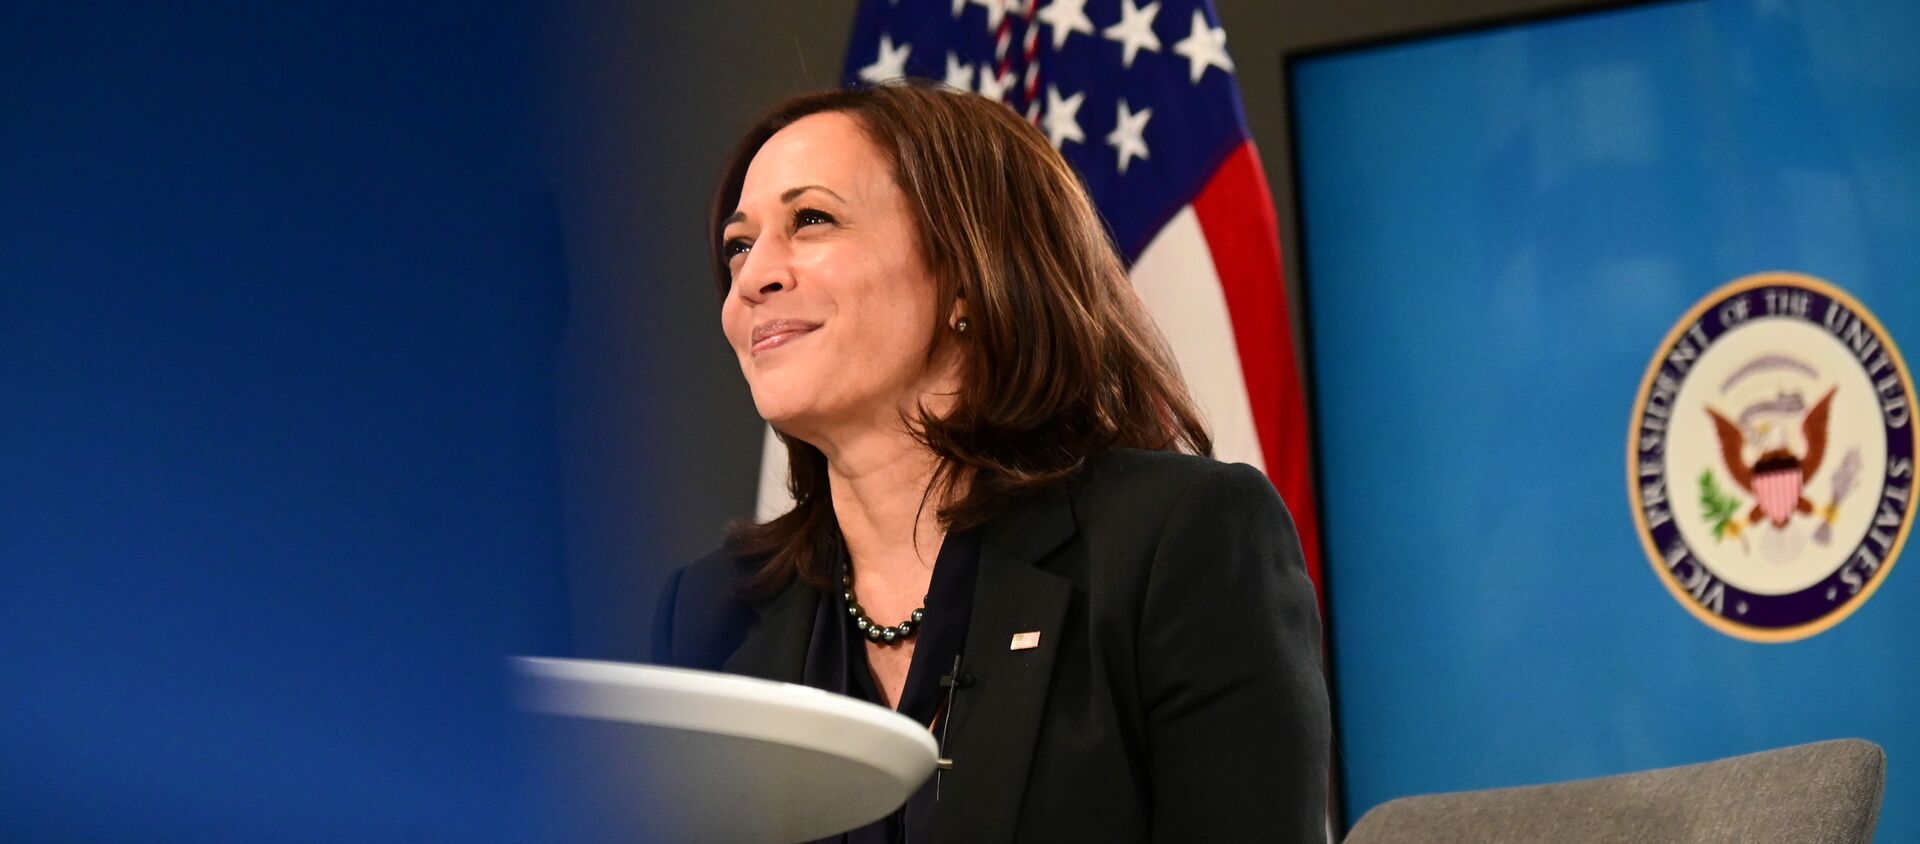 US Vice President Kamala Harris participates in a virtual meeting to discuss the newly-signed American Rescue Plan, COVID-19 relief legislation, at the White House in Washington, US, March 11, 2021 - Sputnik International, 1920, 22.03.2021